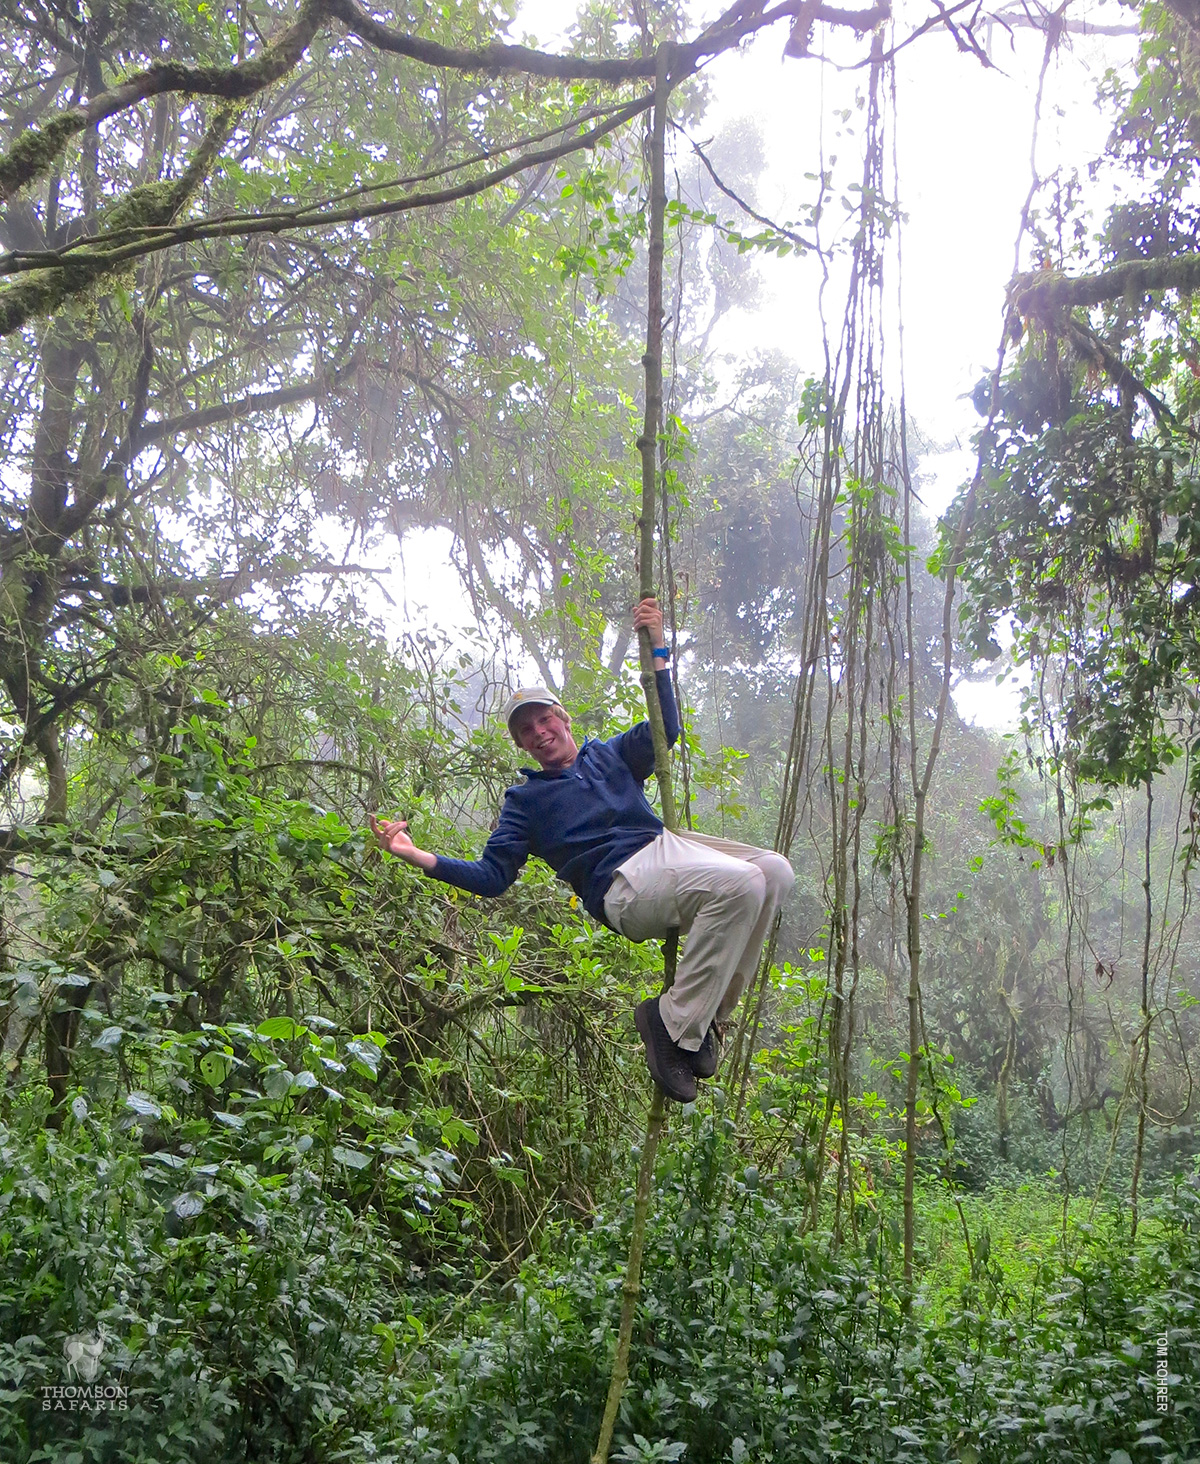 swinging from vines in rain forest 